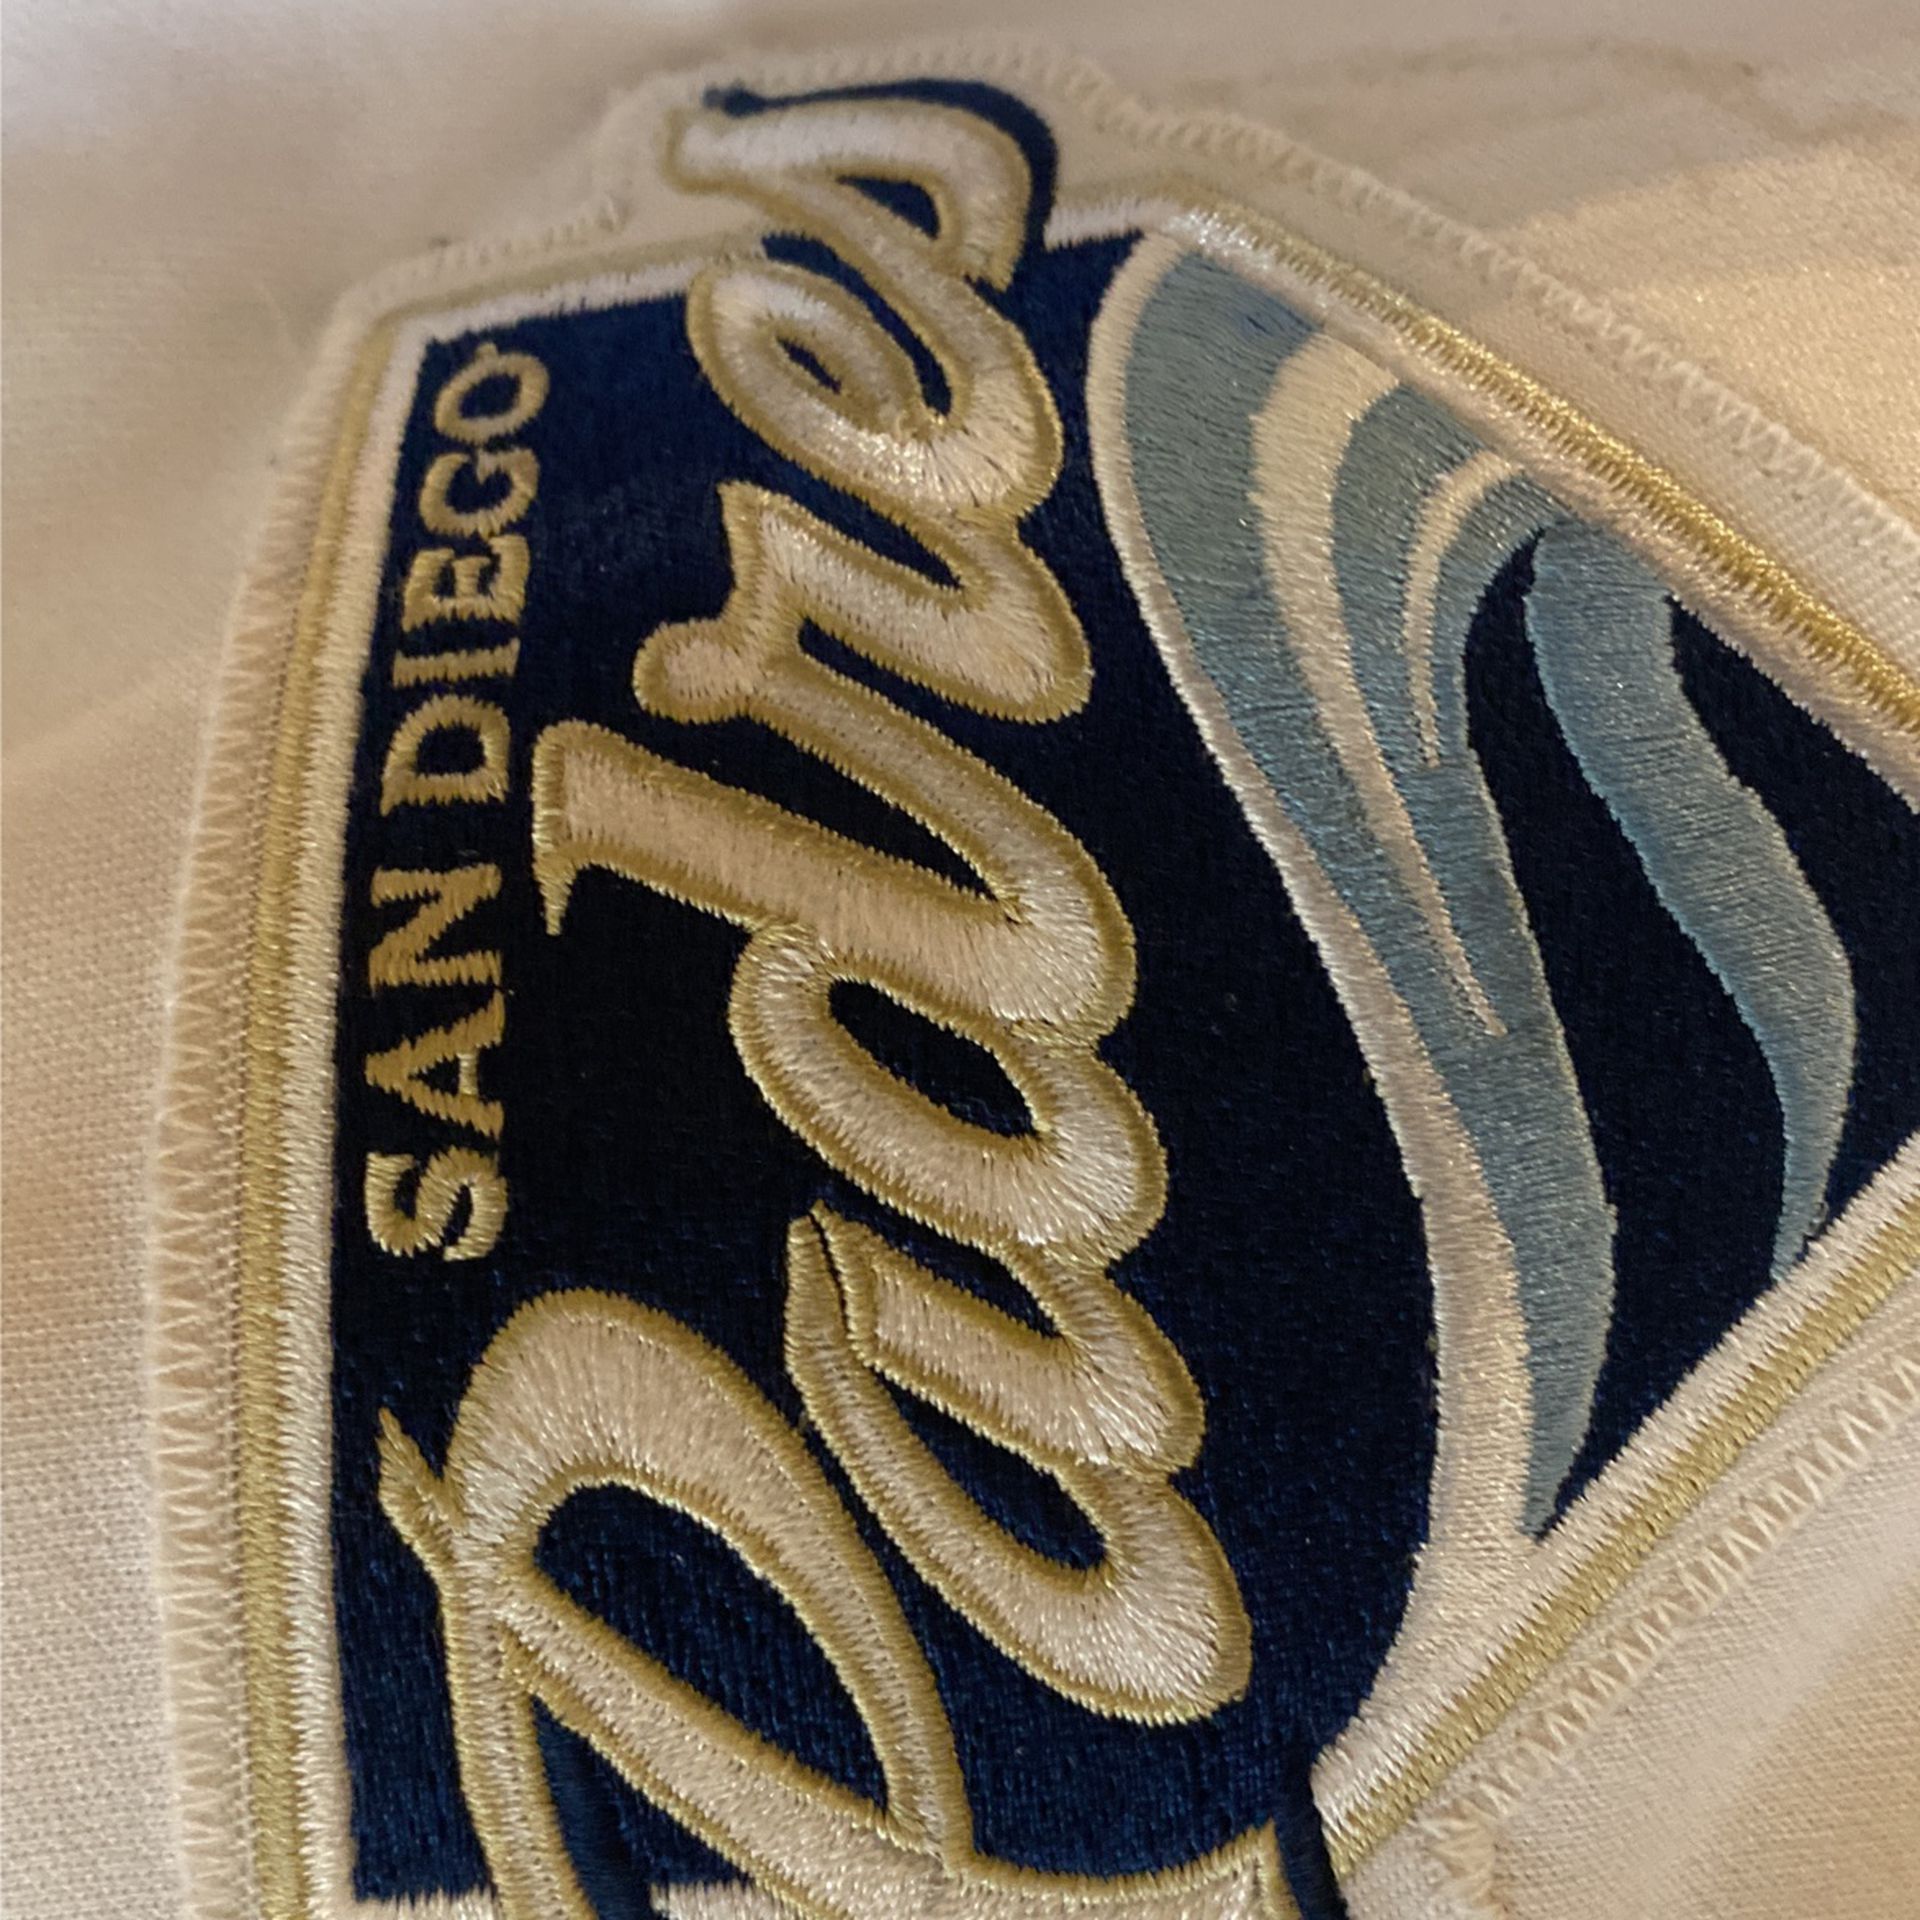 1998 Padres Pinstripe Jersey for Sale in Chula Vista, CA - OfferUp